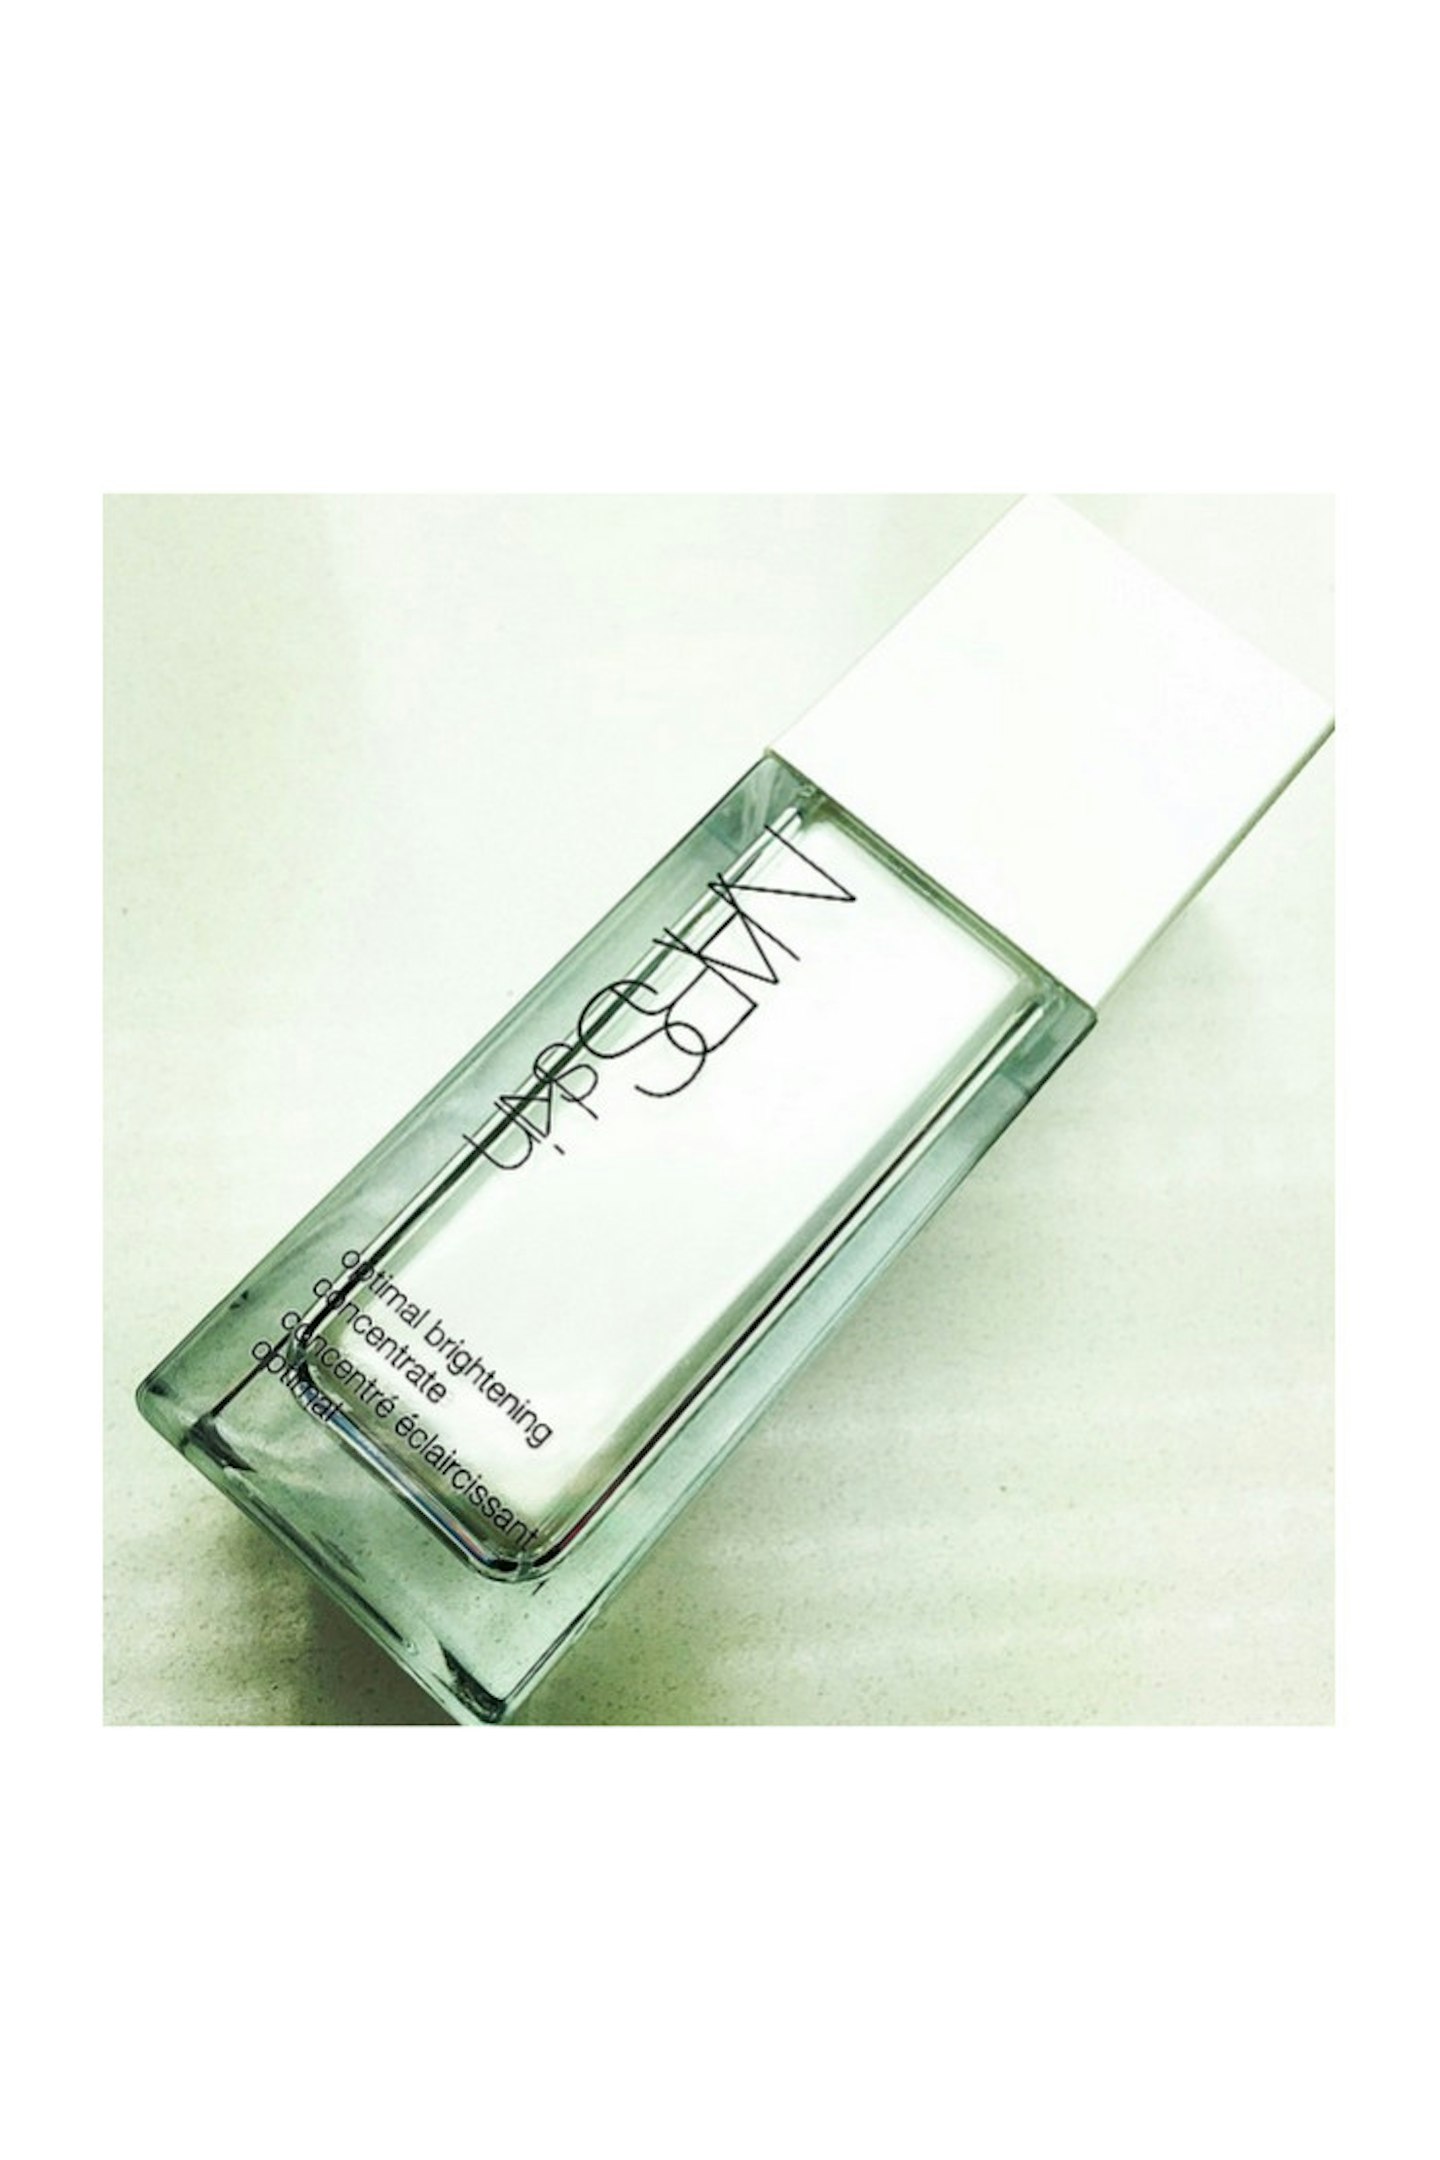 NARS Optimal Brightening Concentrate, £51.00